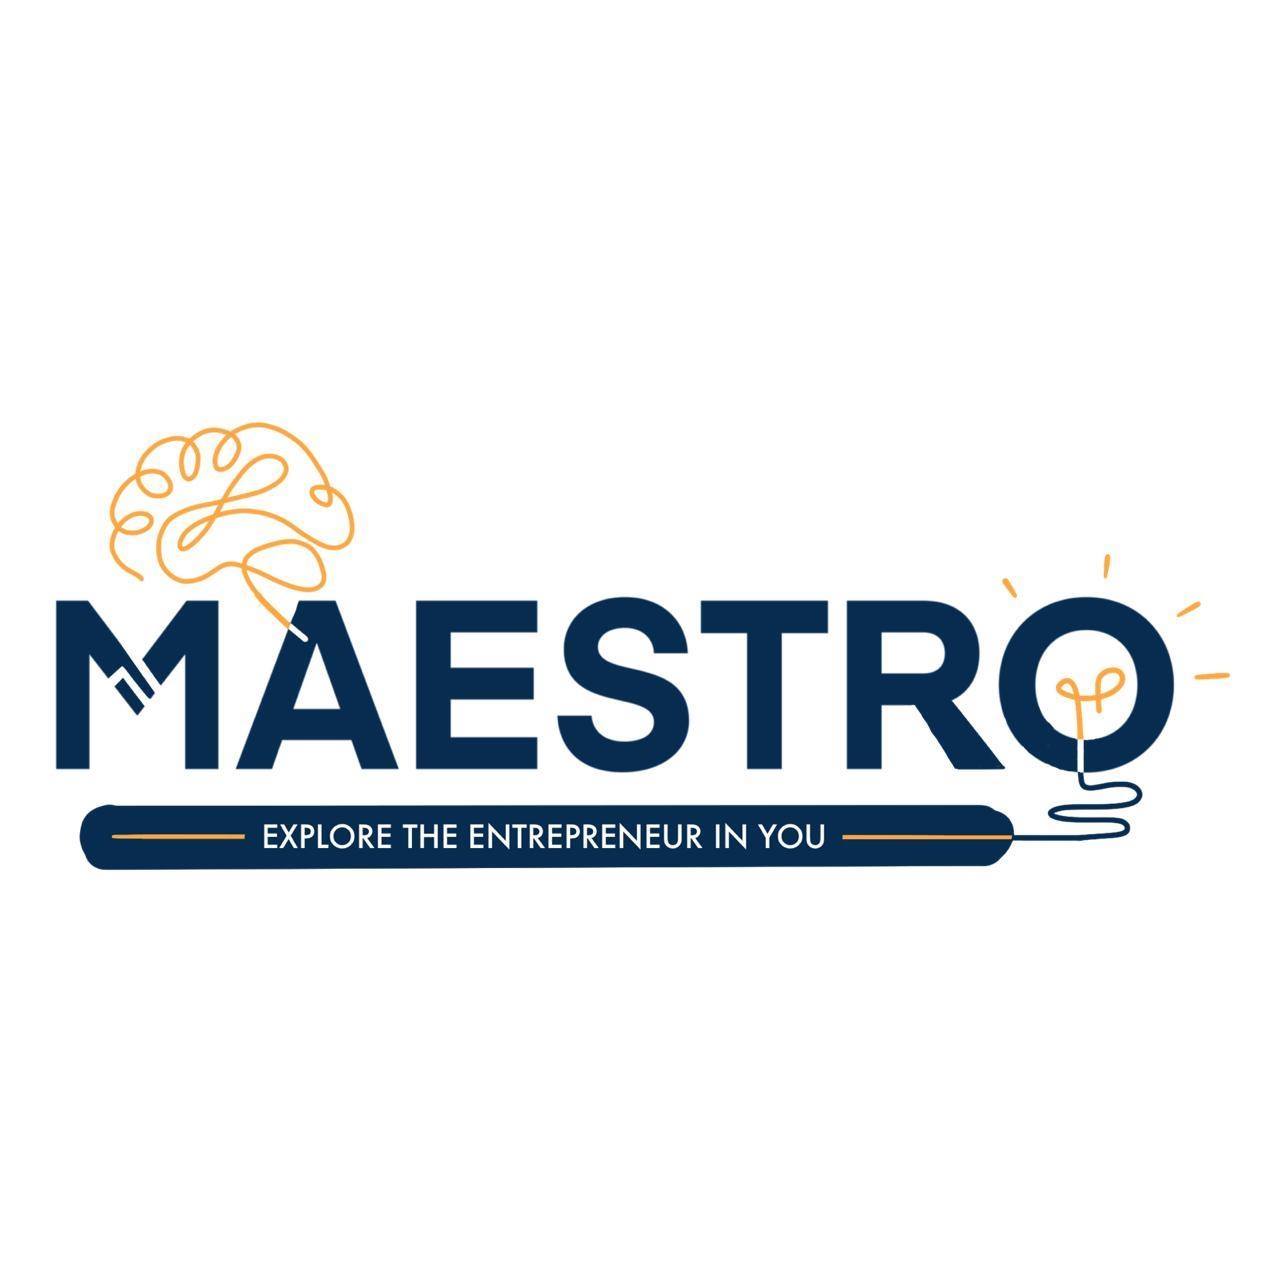 Awaking the hidden entrepreneur in you beyond COVID-19 – The 3rd Chapter of Maestro